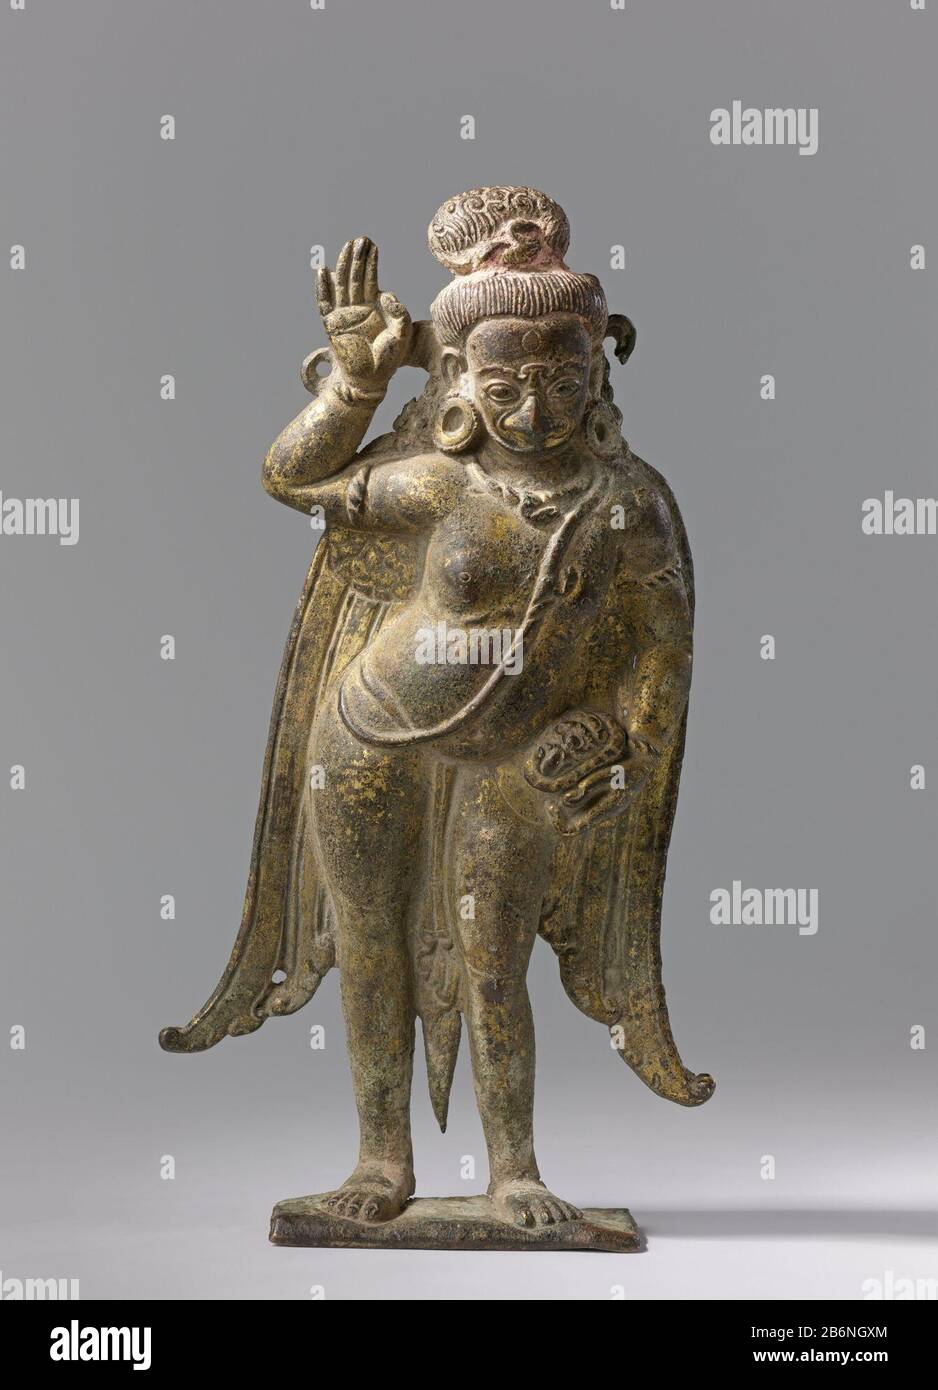 Page 2 - Abhaya Mudra High Resolution Stock Photography and Images - Alamy